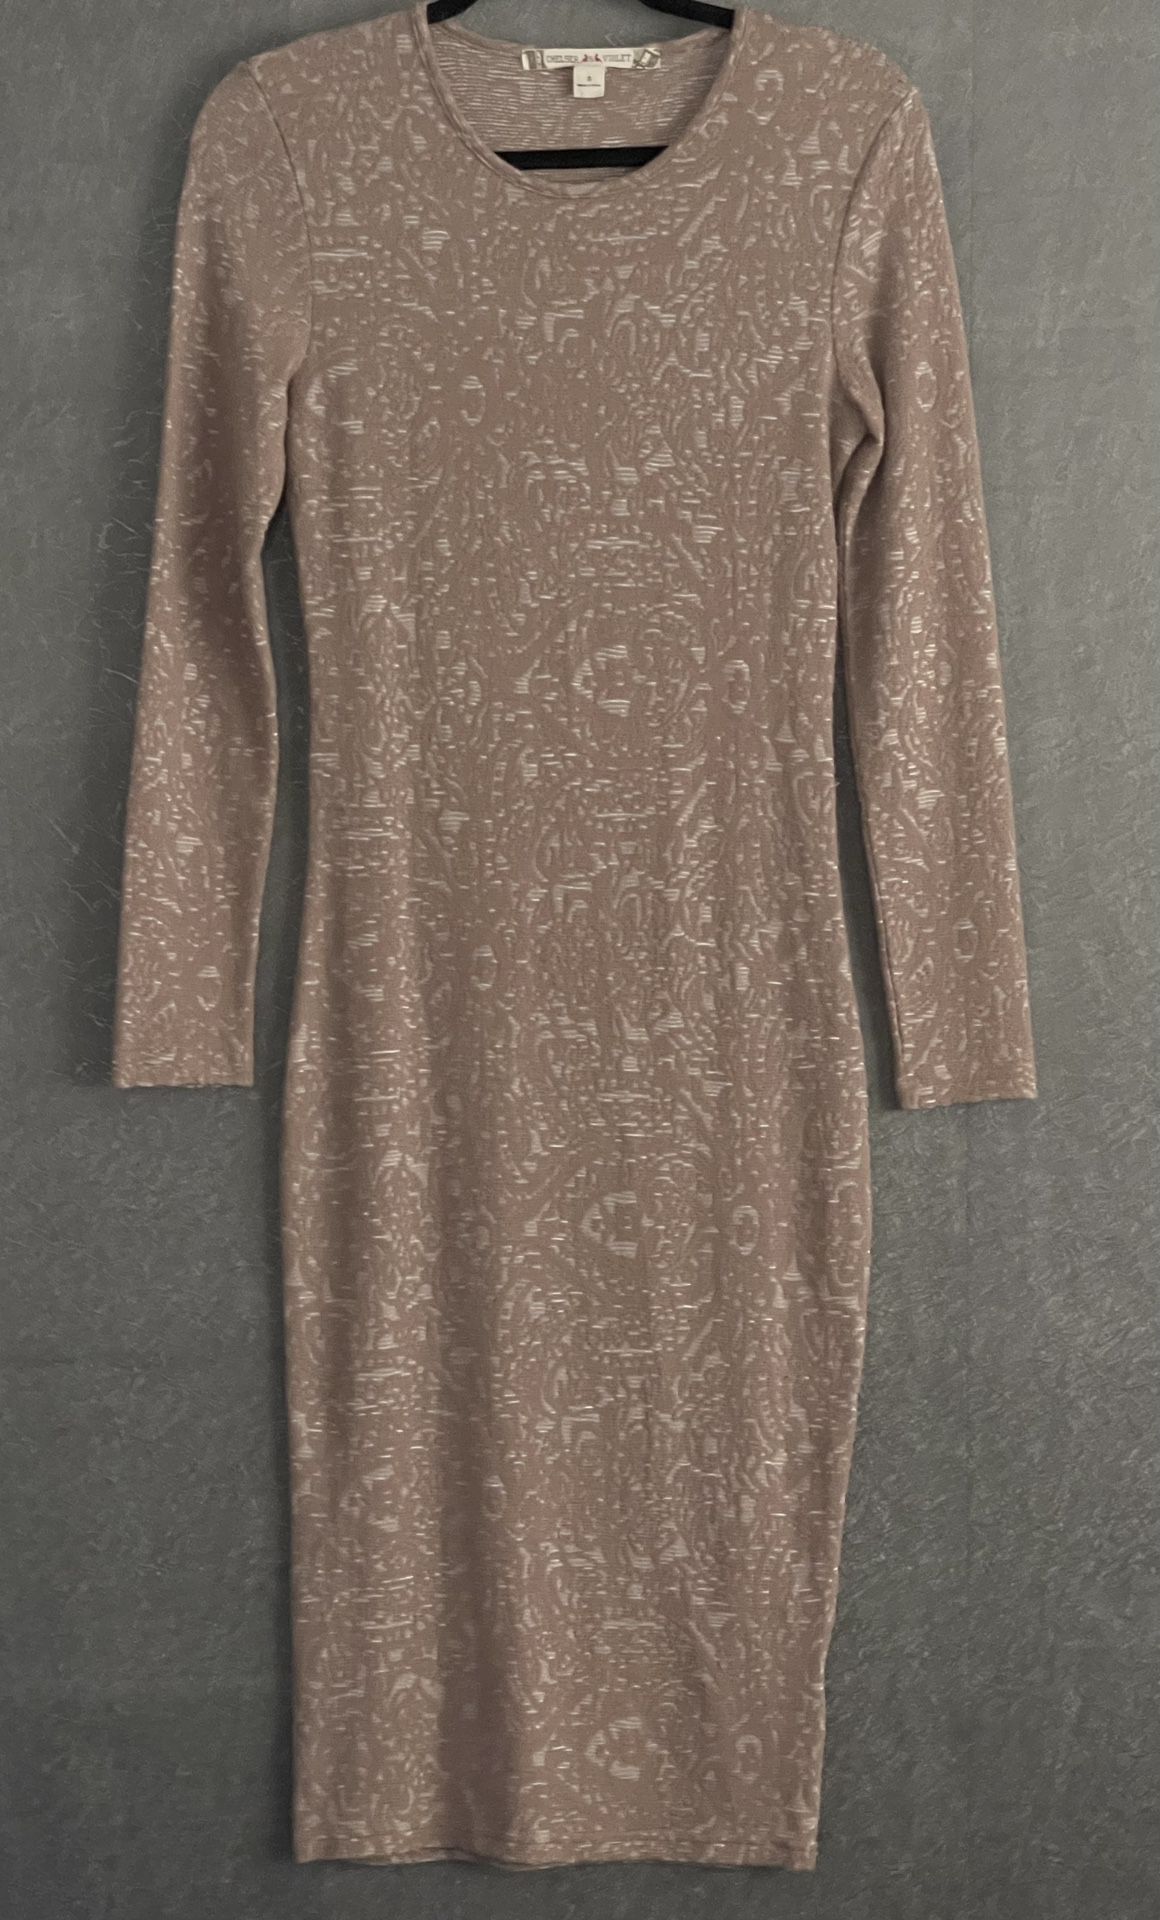 Chelsea & Violet Women's Sweater/Body Con Dress Taupe/Beige Sz Small